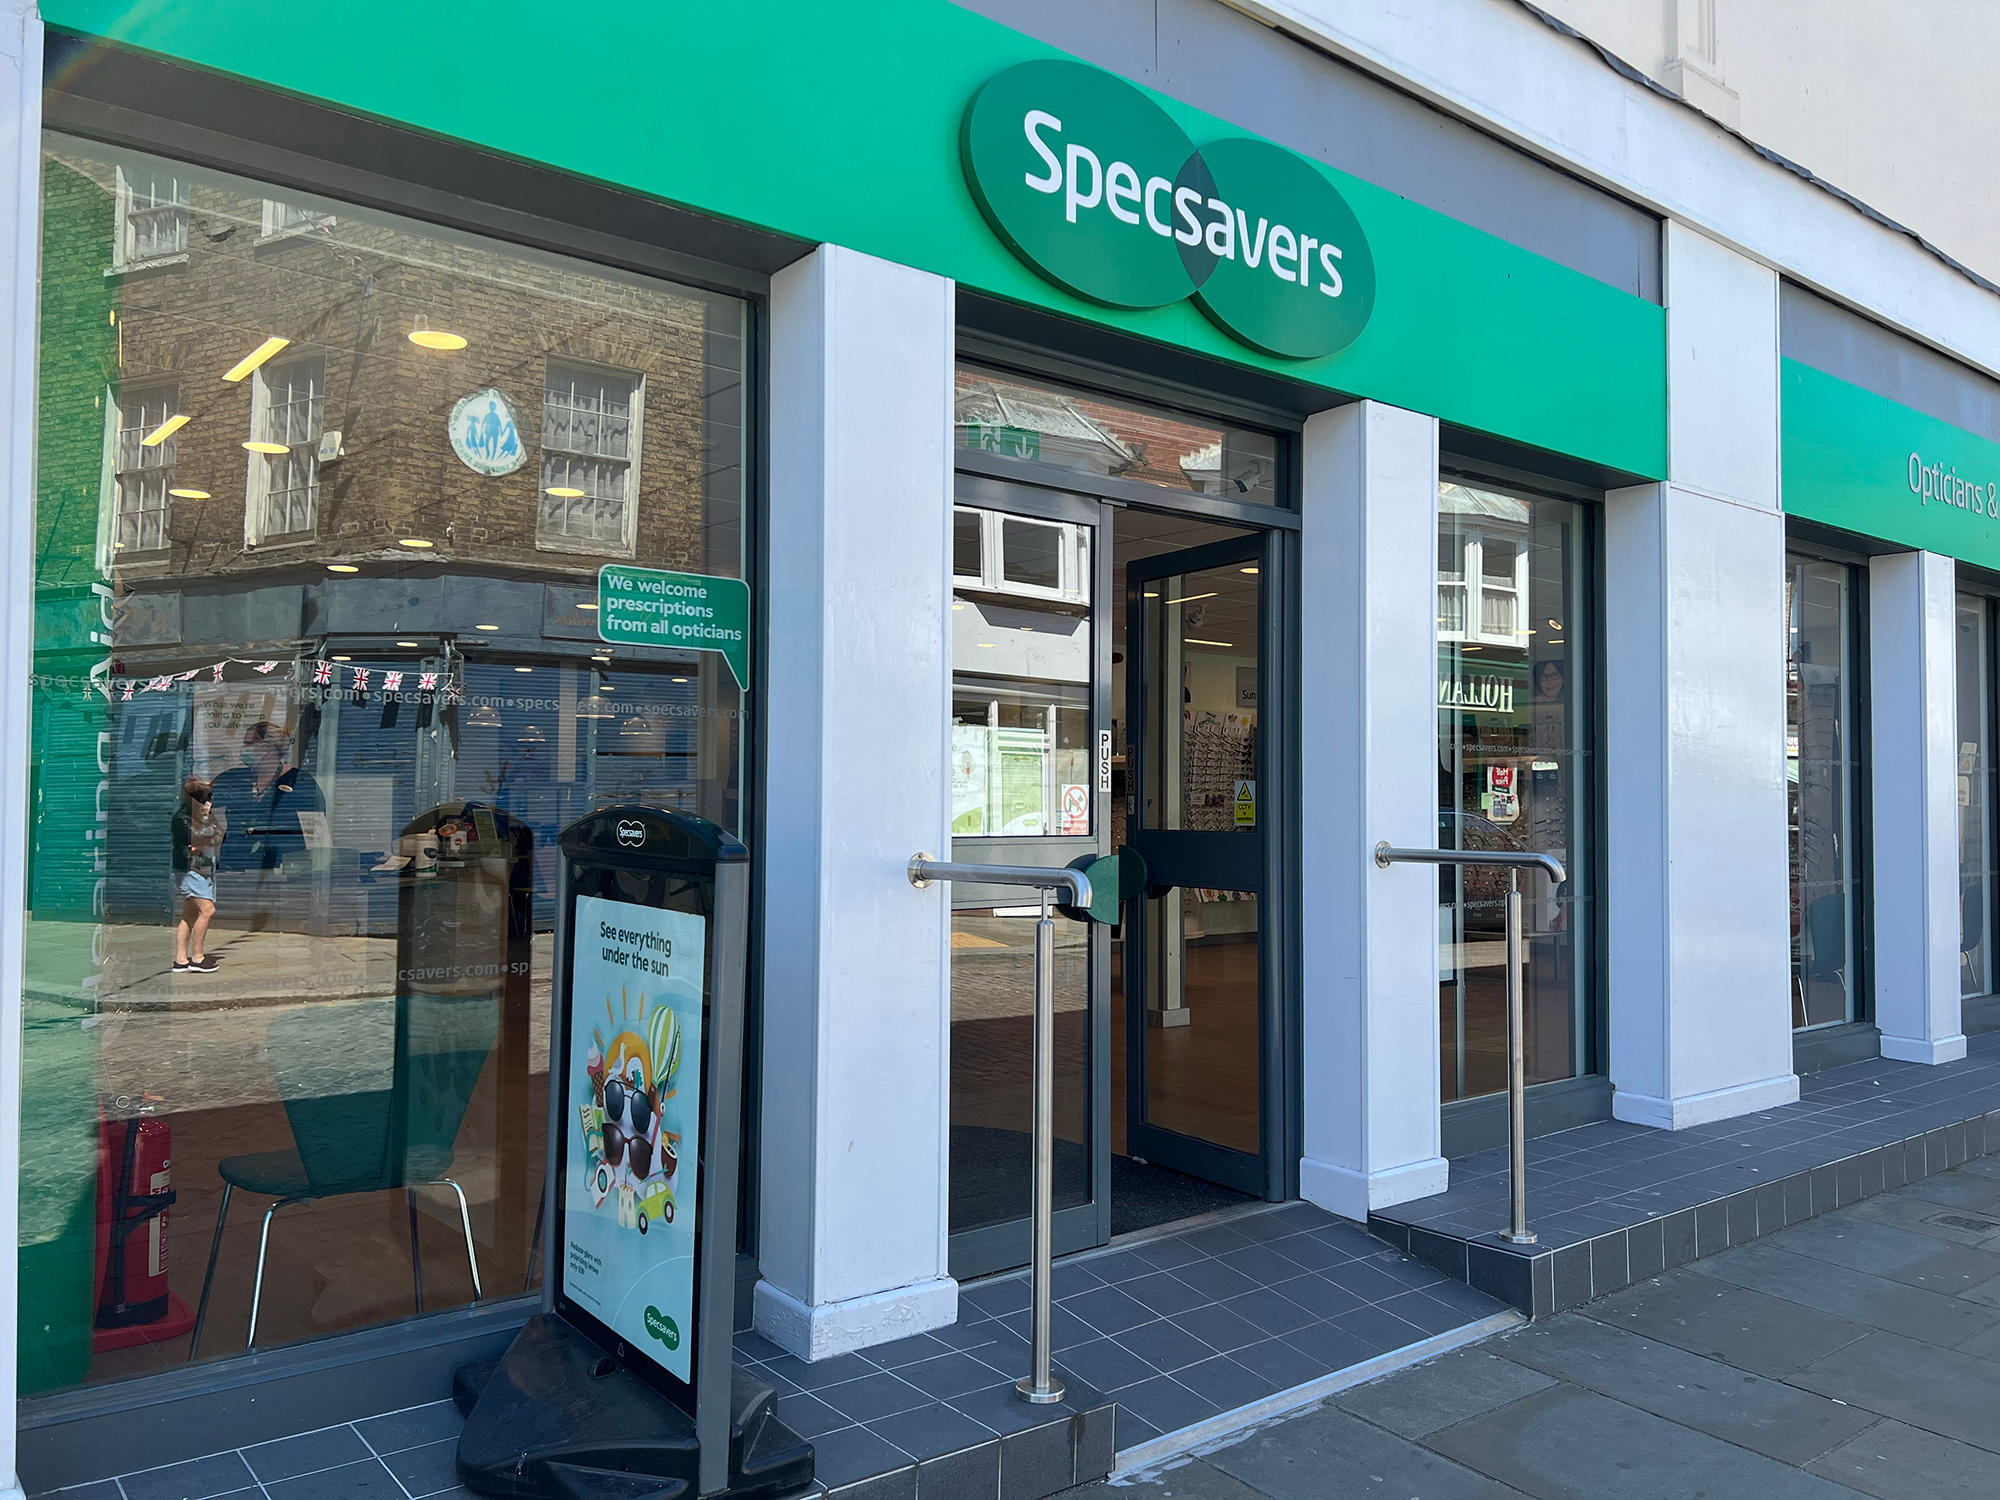 Specsavers Sheerness Specsavers Opticians and Audiologists - Sheerness Sheerness 01795 414000